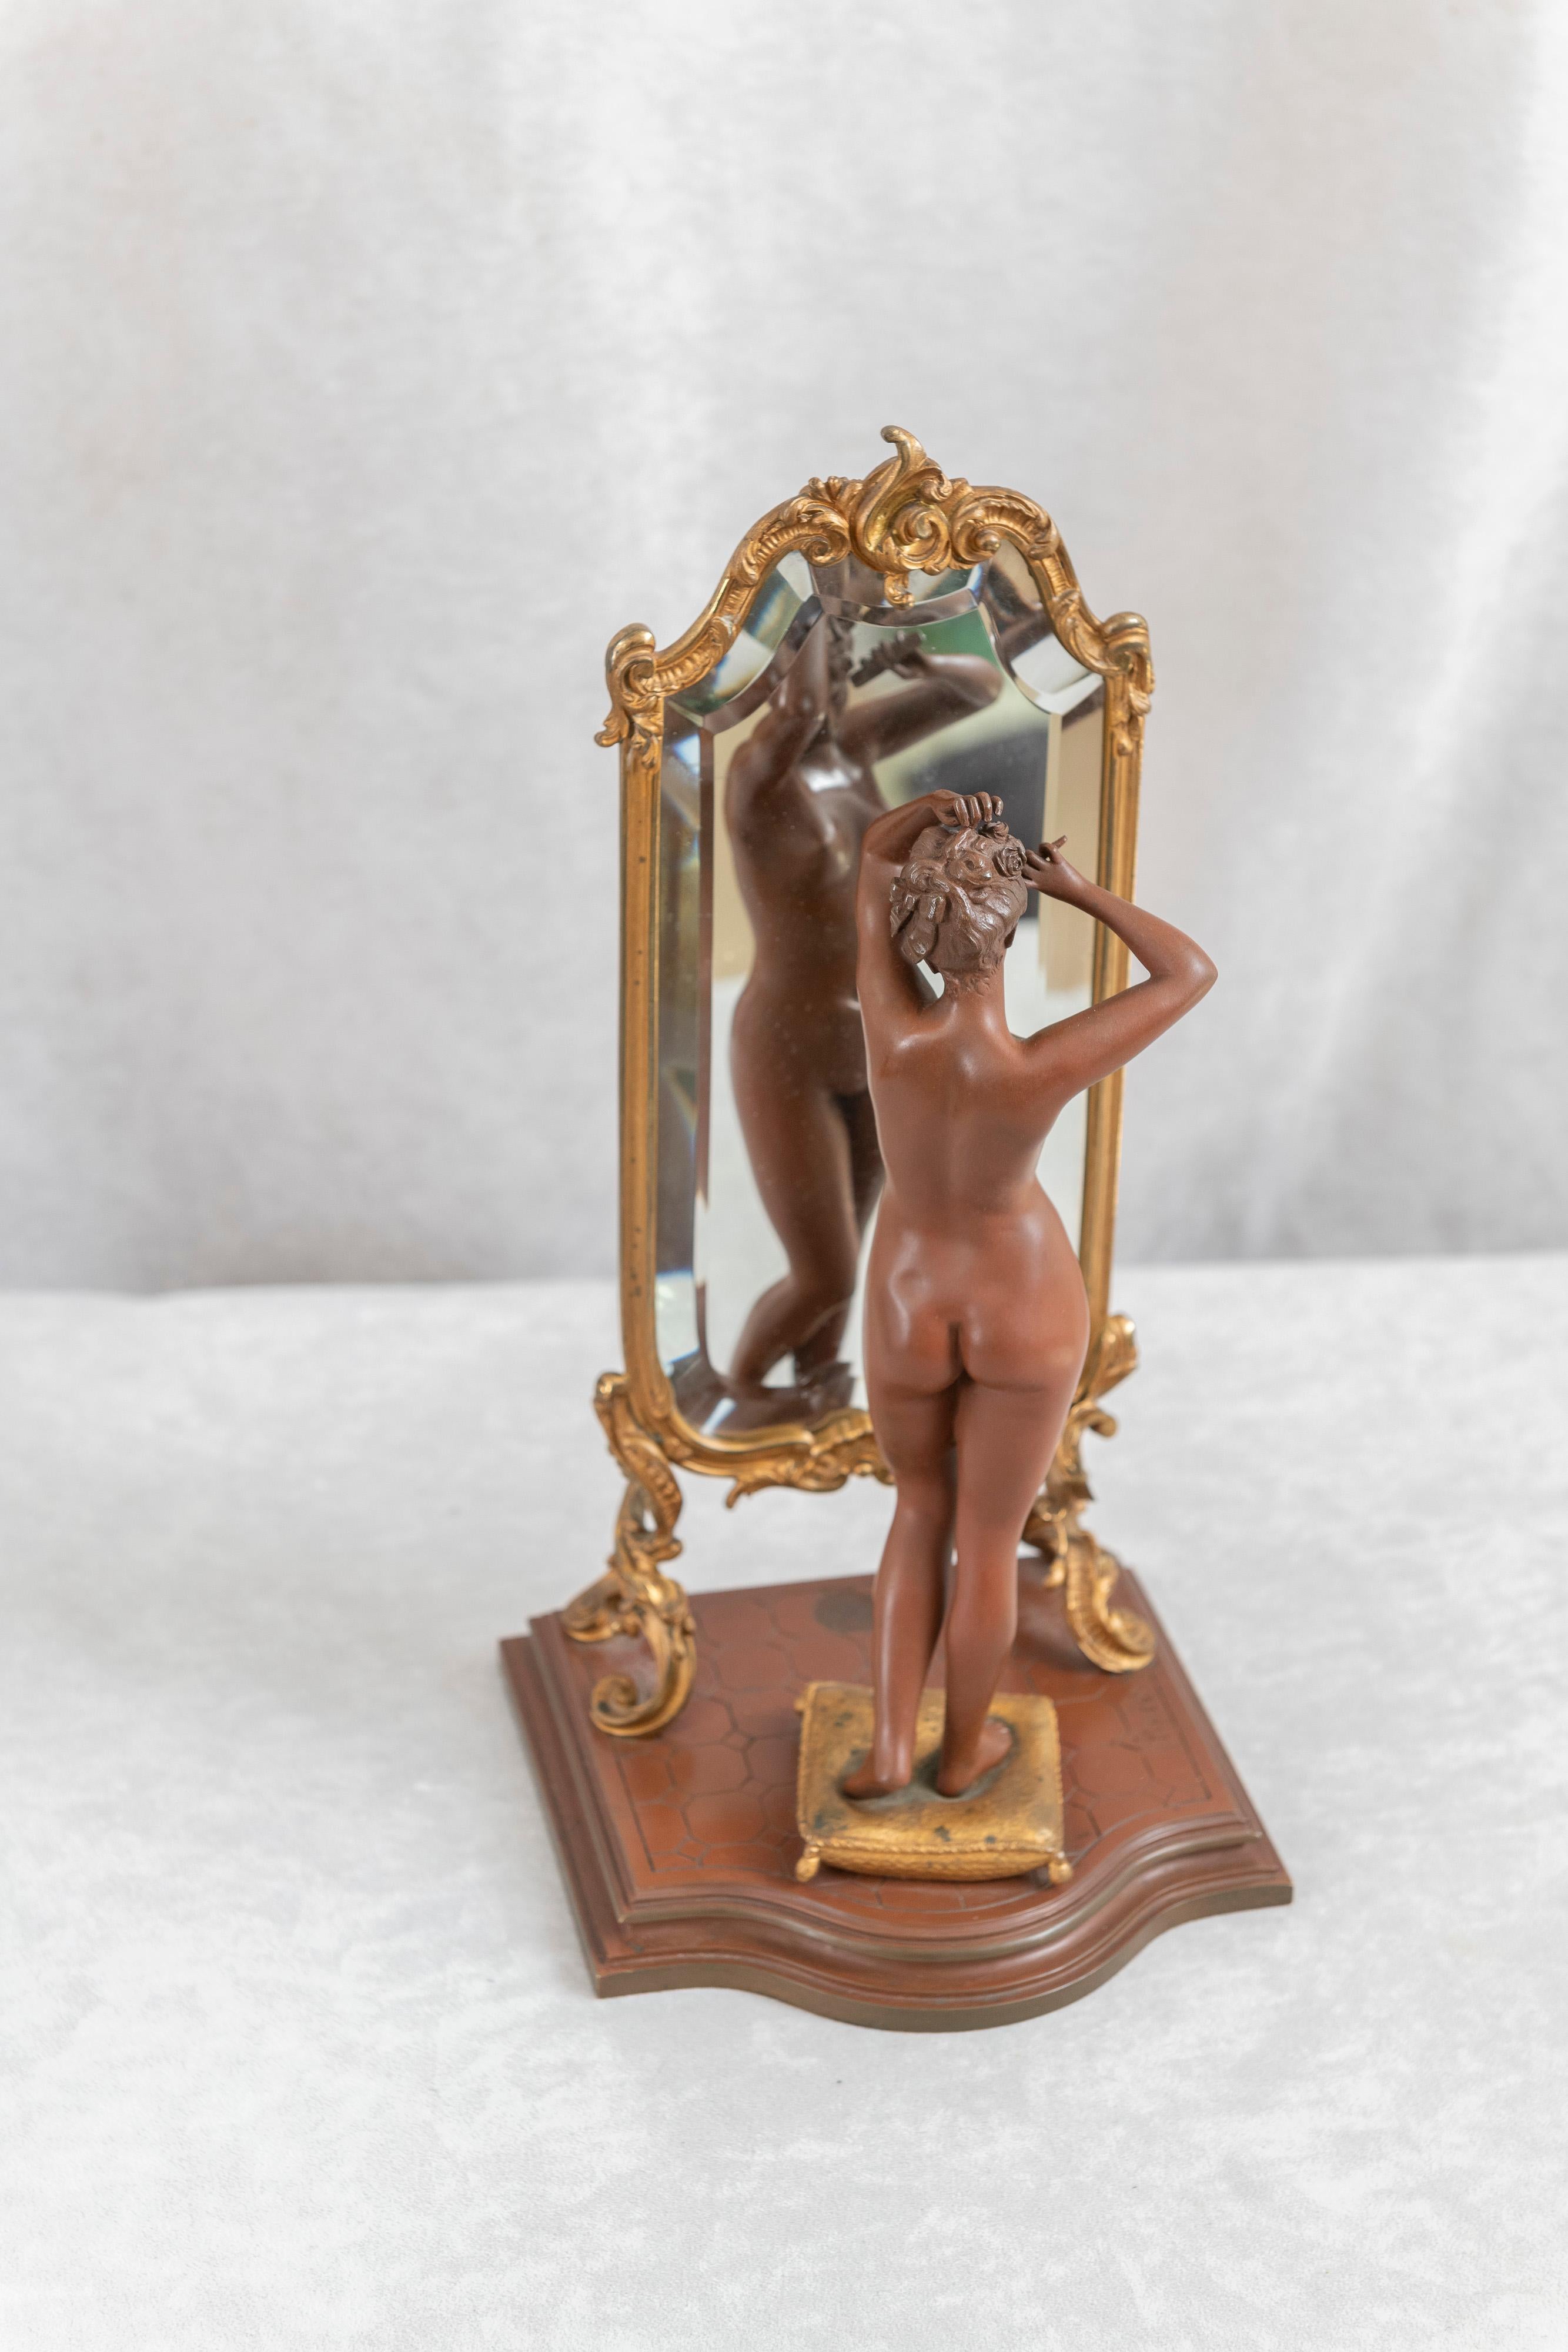 This very wonderful bronze may well be the very best model ever done by the highly regarded French artist Emile Pinedo. Just looking at it one can see what a wonderful little scene we have here. The high detailing, and the rich patina all come